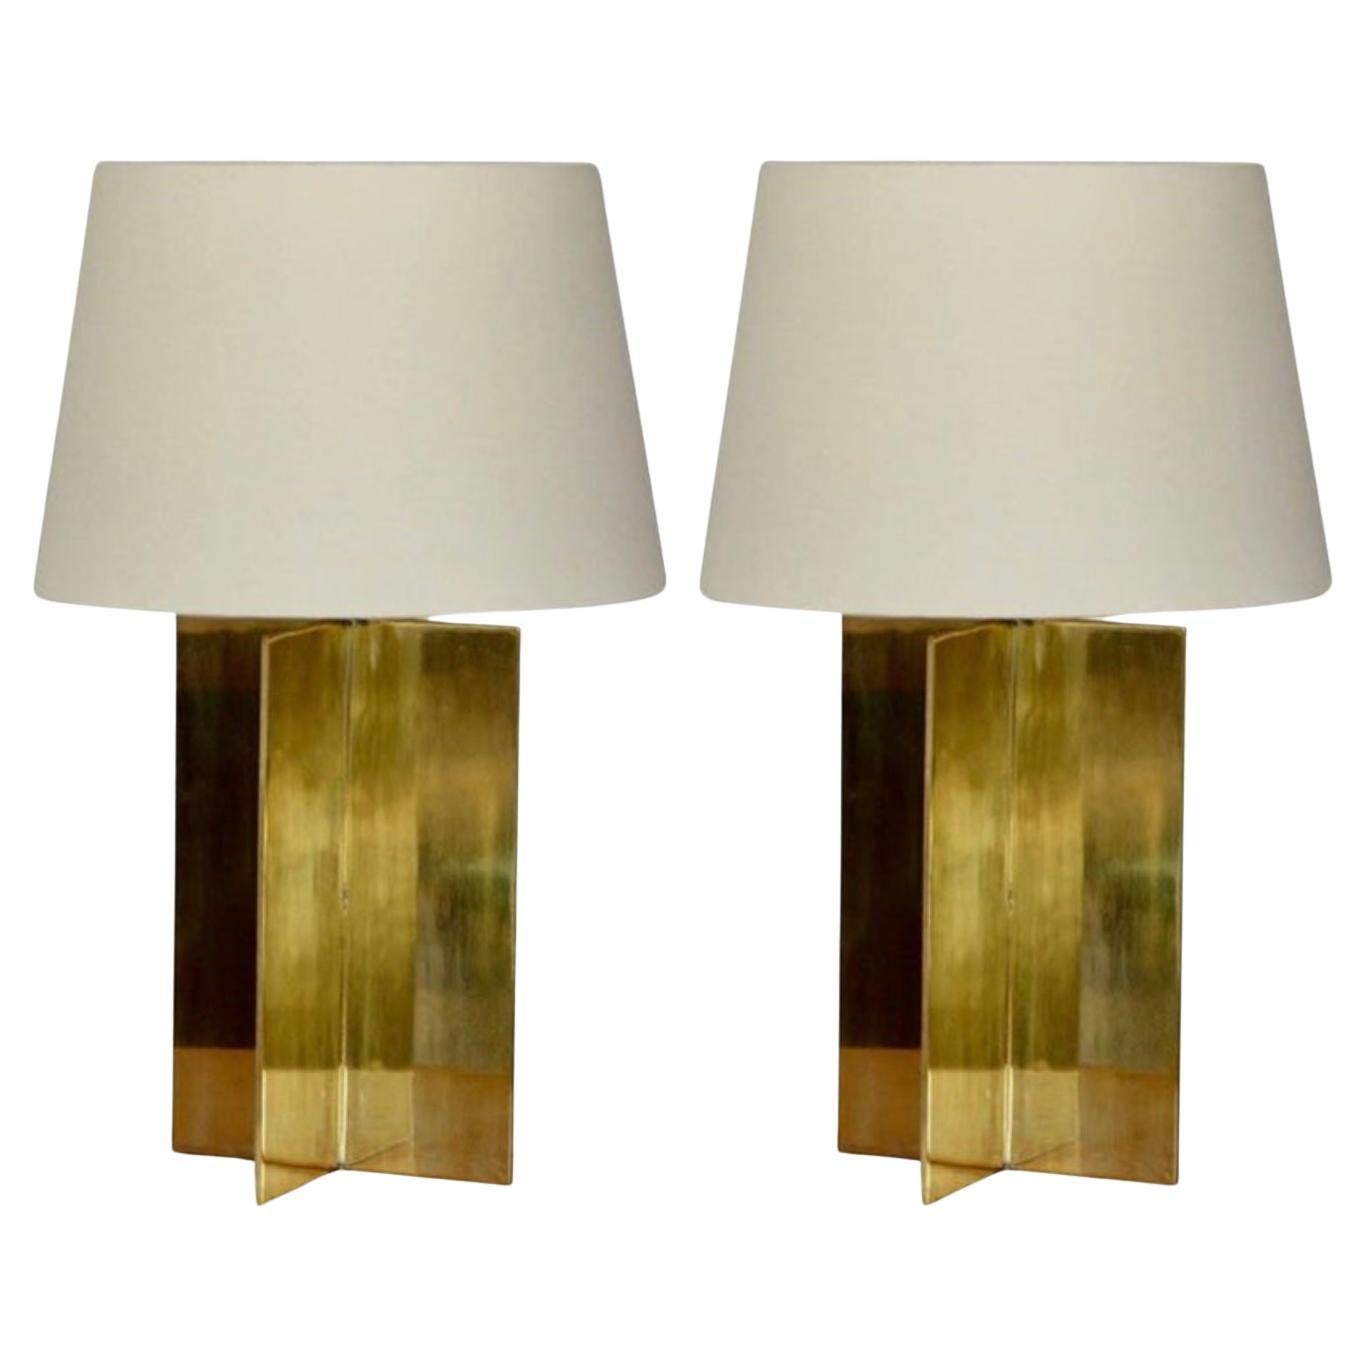 Pair of 'Croisillon' Solid Brass and Parchment Lamps